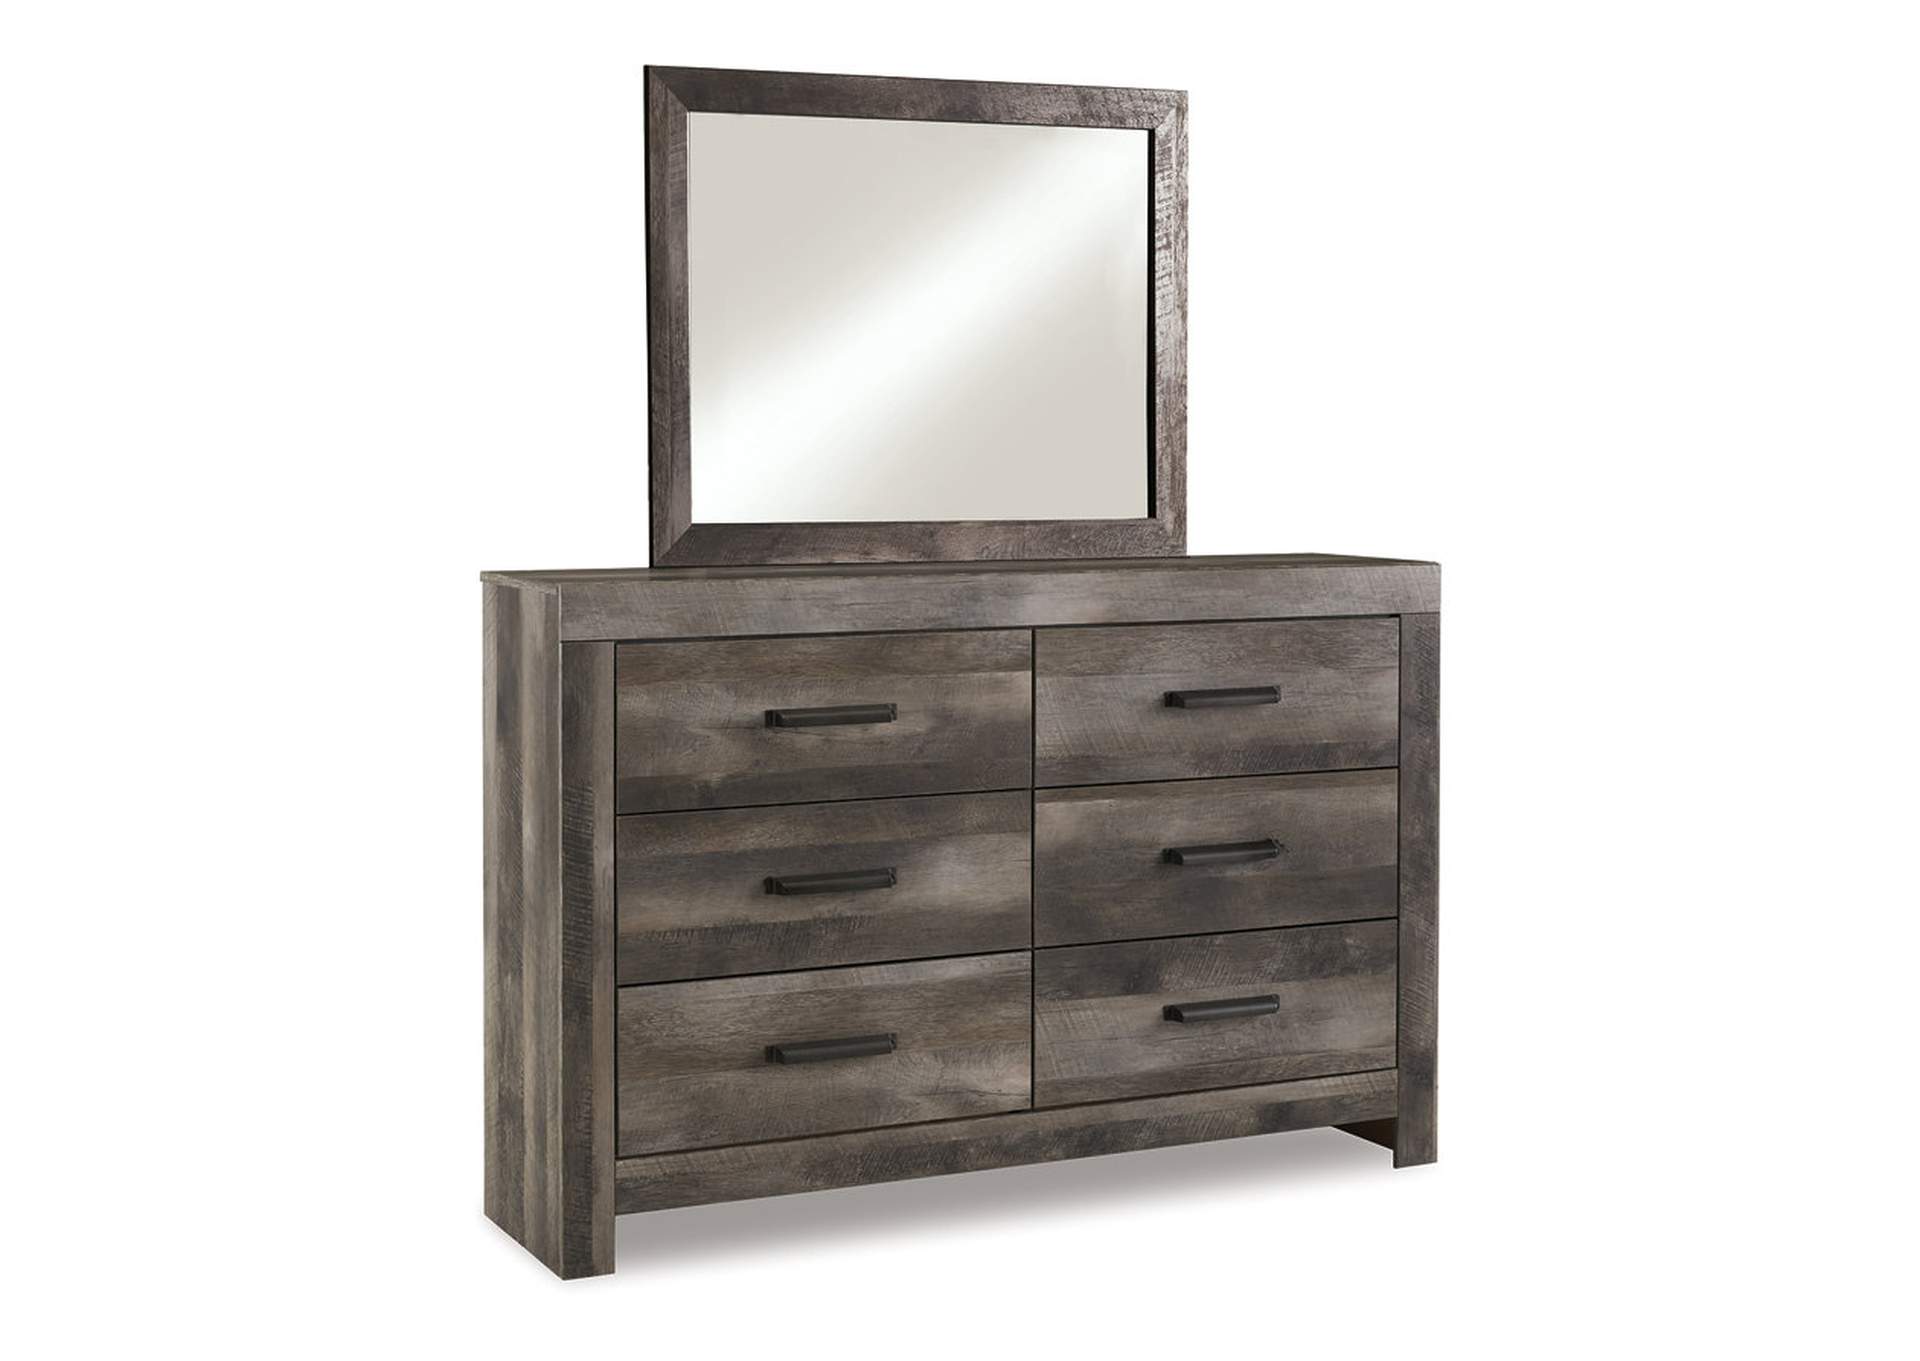 Wynnlow King Poster Bed with Mirrored Dresser, Chest and 2 Nightstands,Signature Design By Ashley